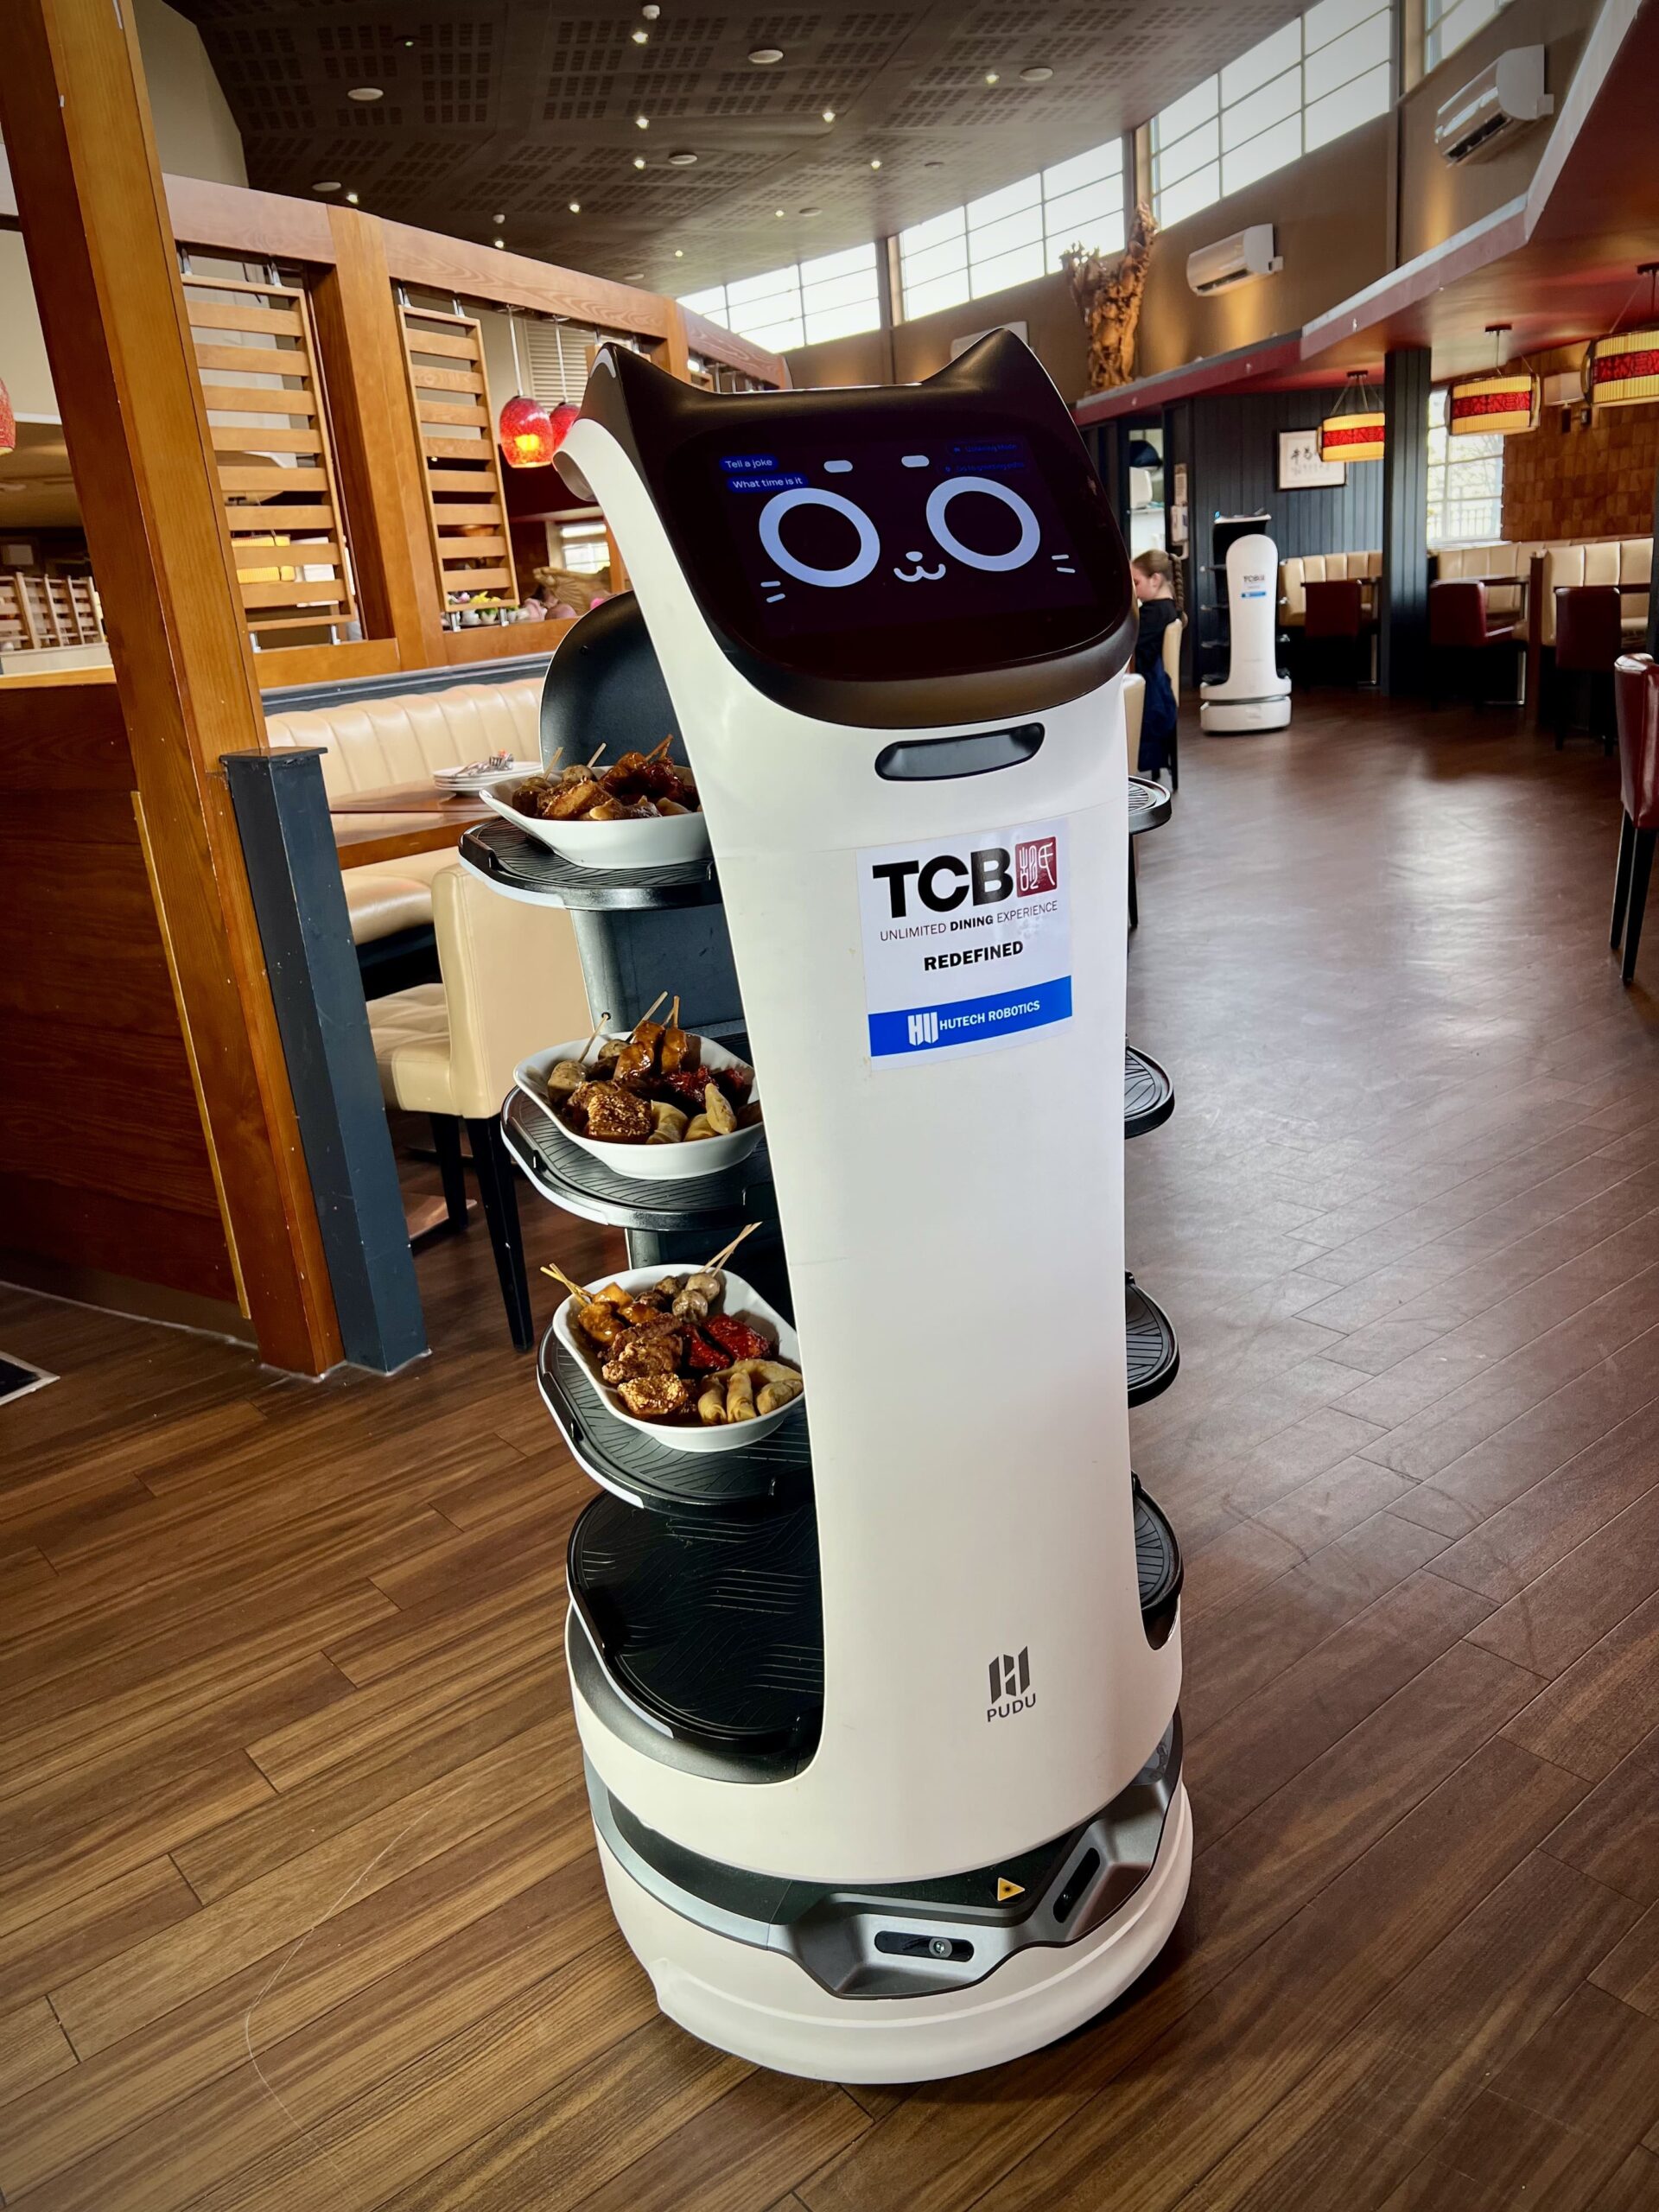 Bellabot loaded with food to be delivered to tables